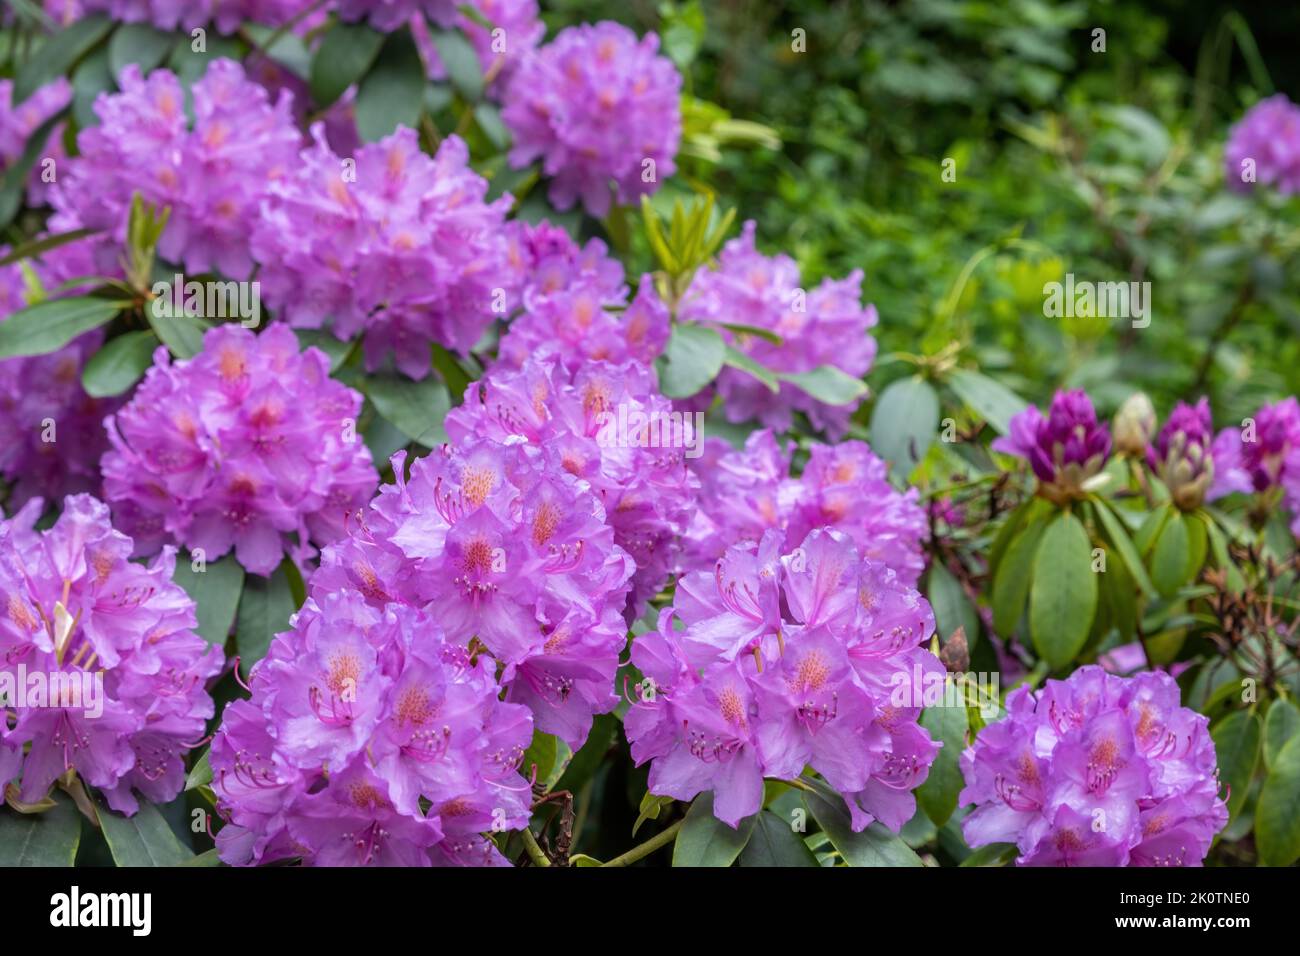 Rhododendron plant at Vondel Park, Amsterdam Netherlands. Close up view of ornamental flowering woody plant in purple color. Blooming tree with fresh Stock Photo